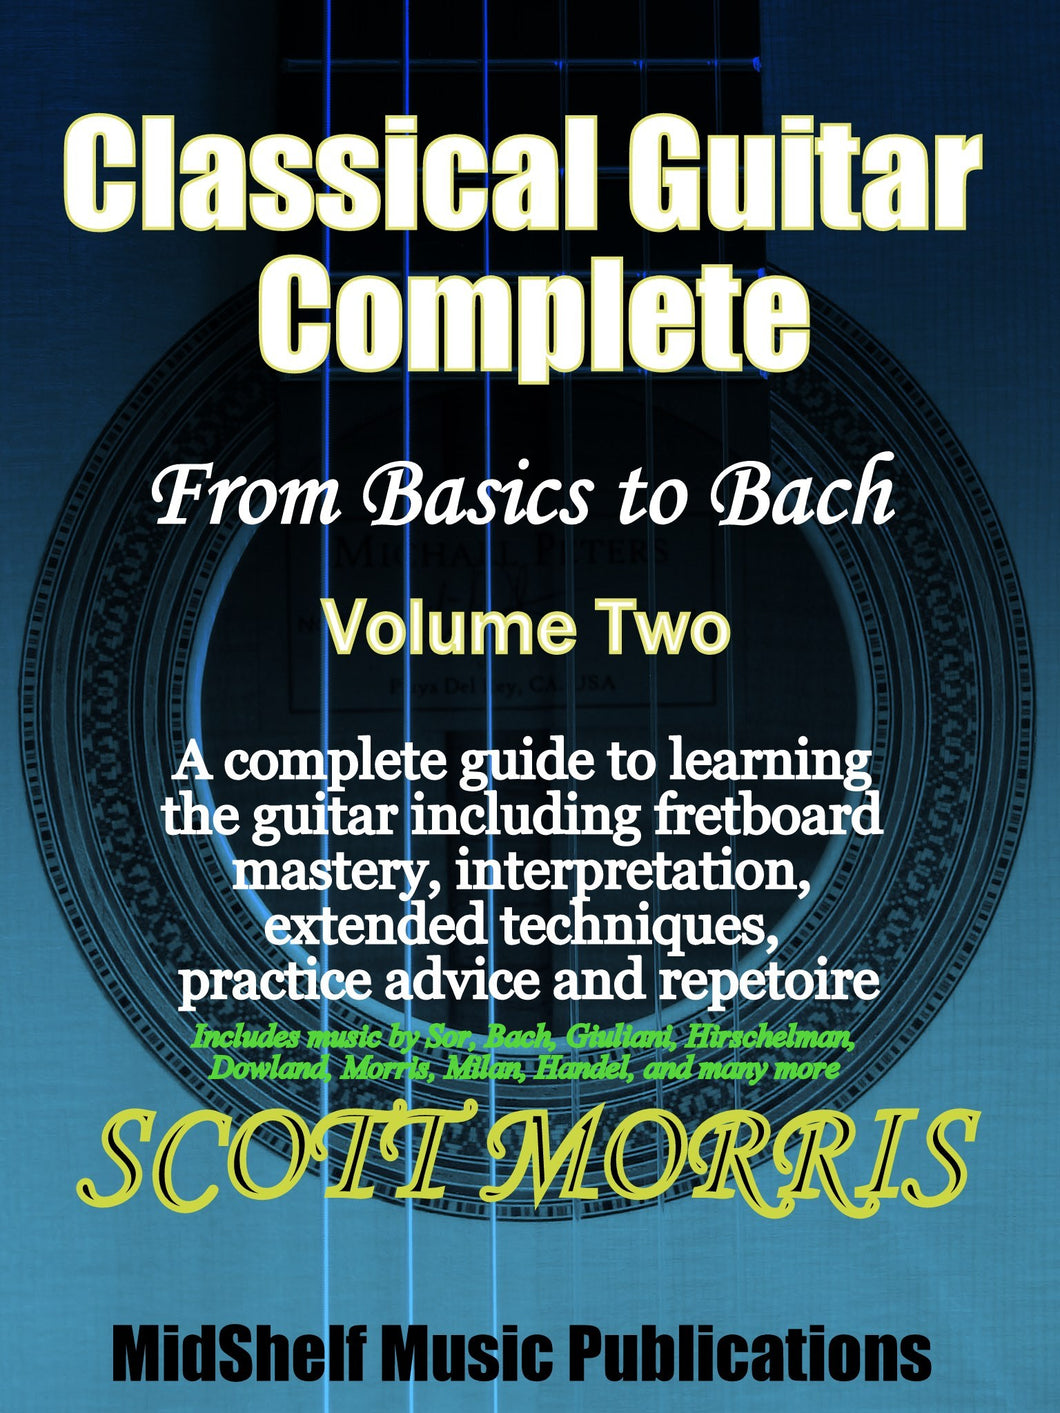 Classical Guitar Complete: From Basics to Bach (Volume Two) - Digital Version